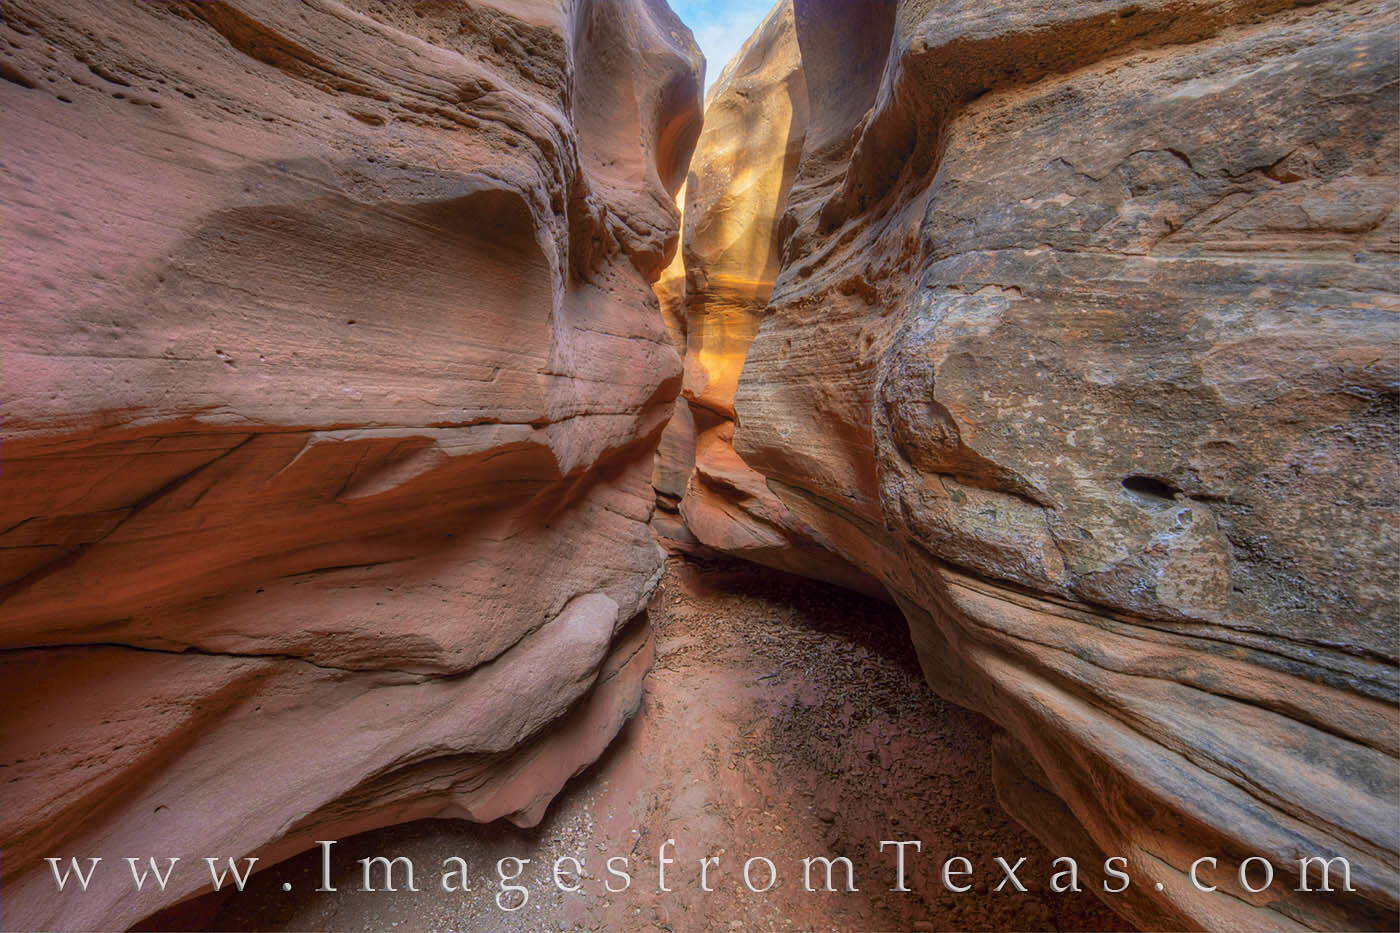 This image from Palo Duro Canyon's slot canyons offers a different view of the Central Utah Lower Slot. As part of the larger...